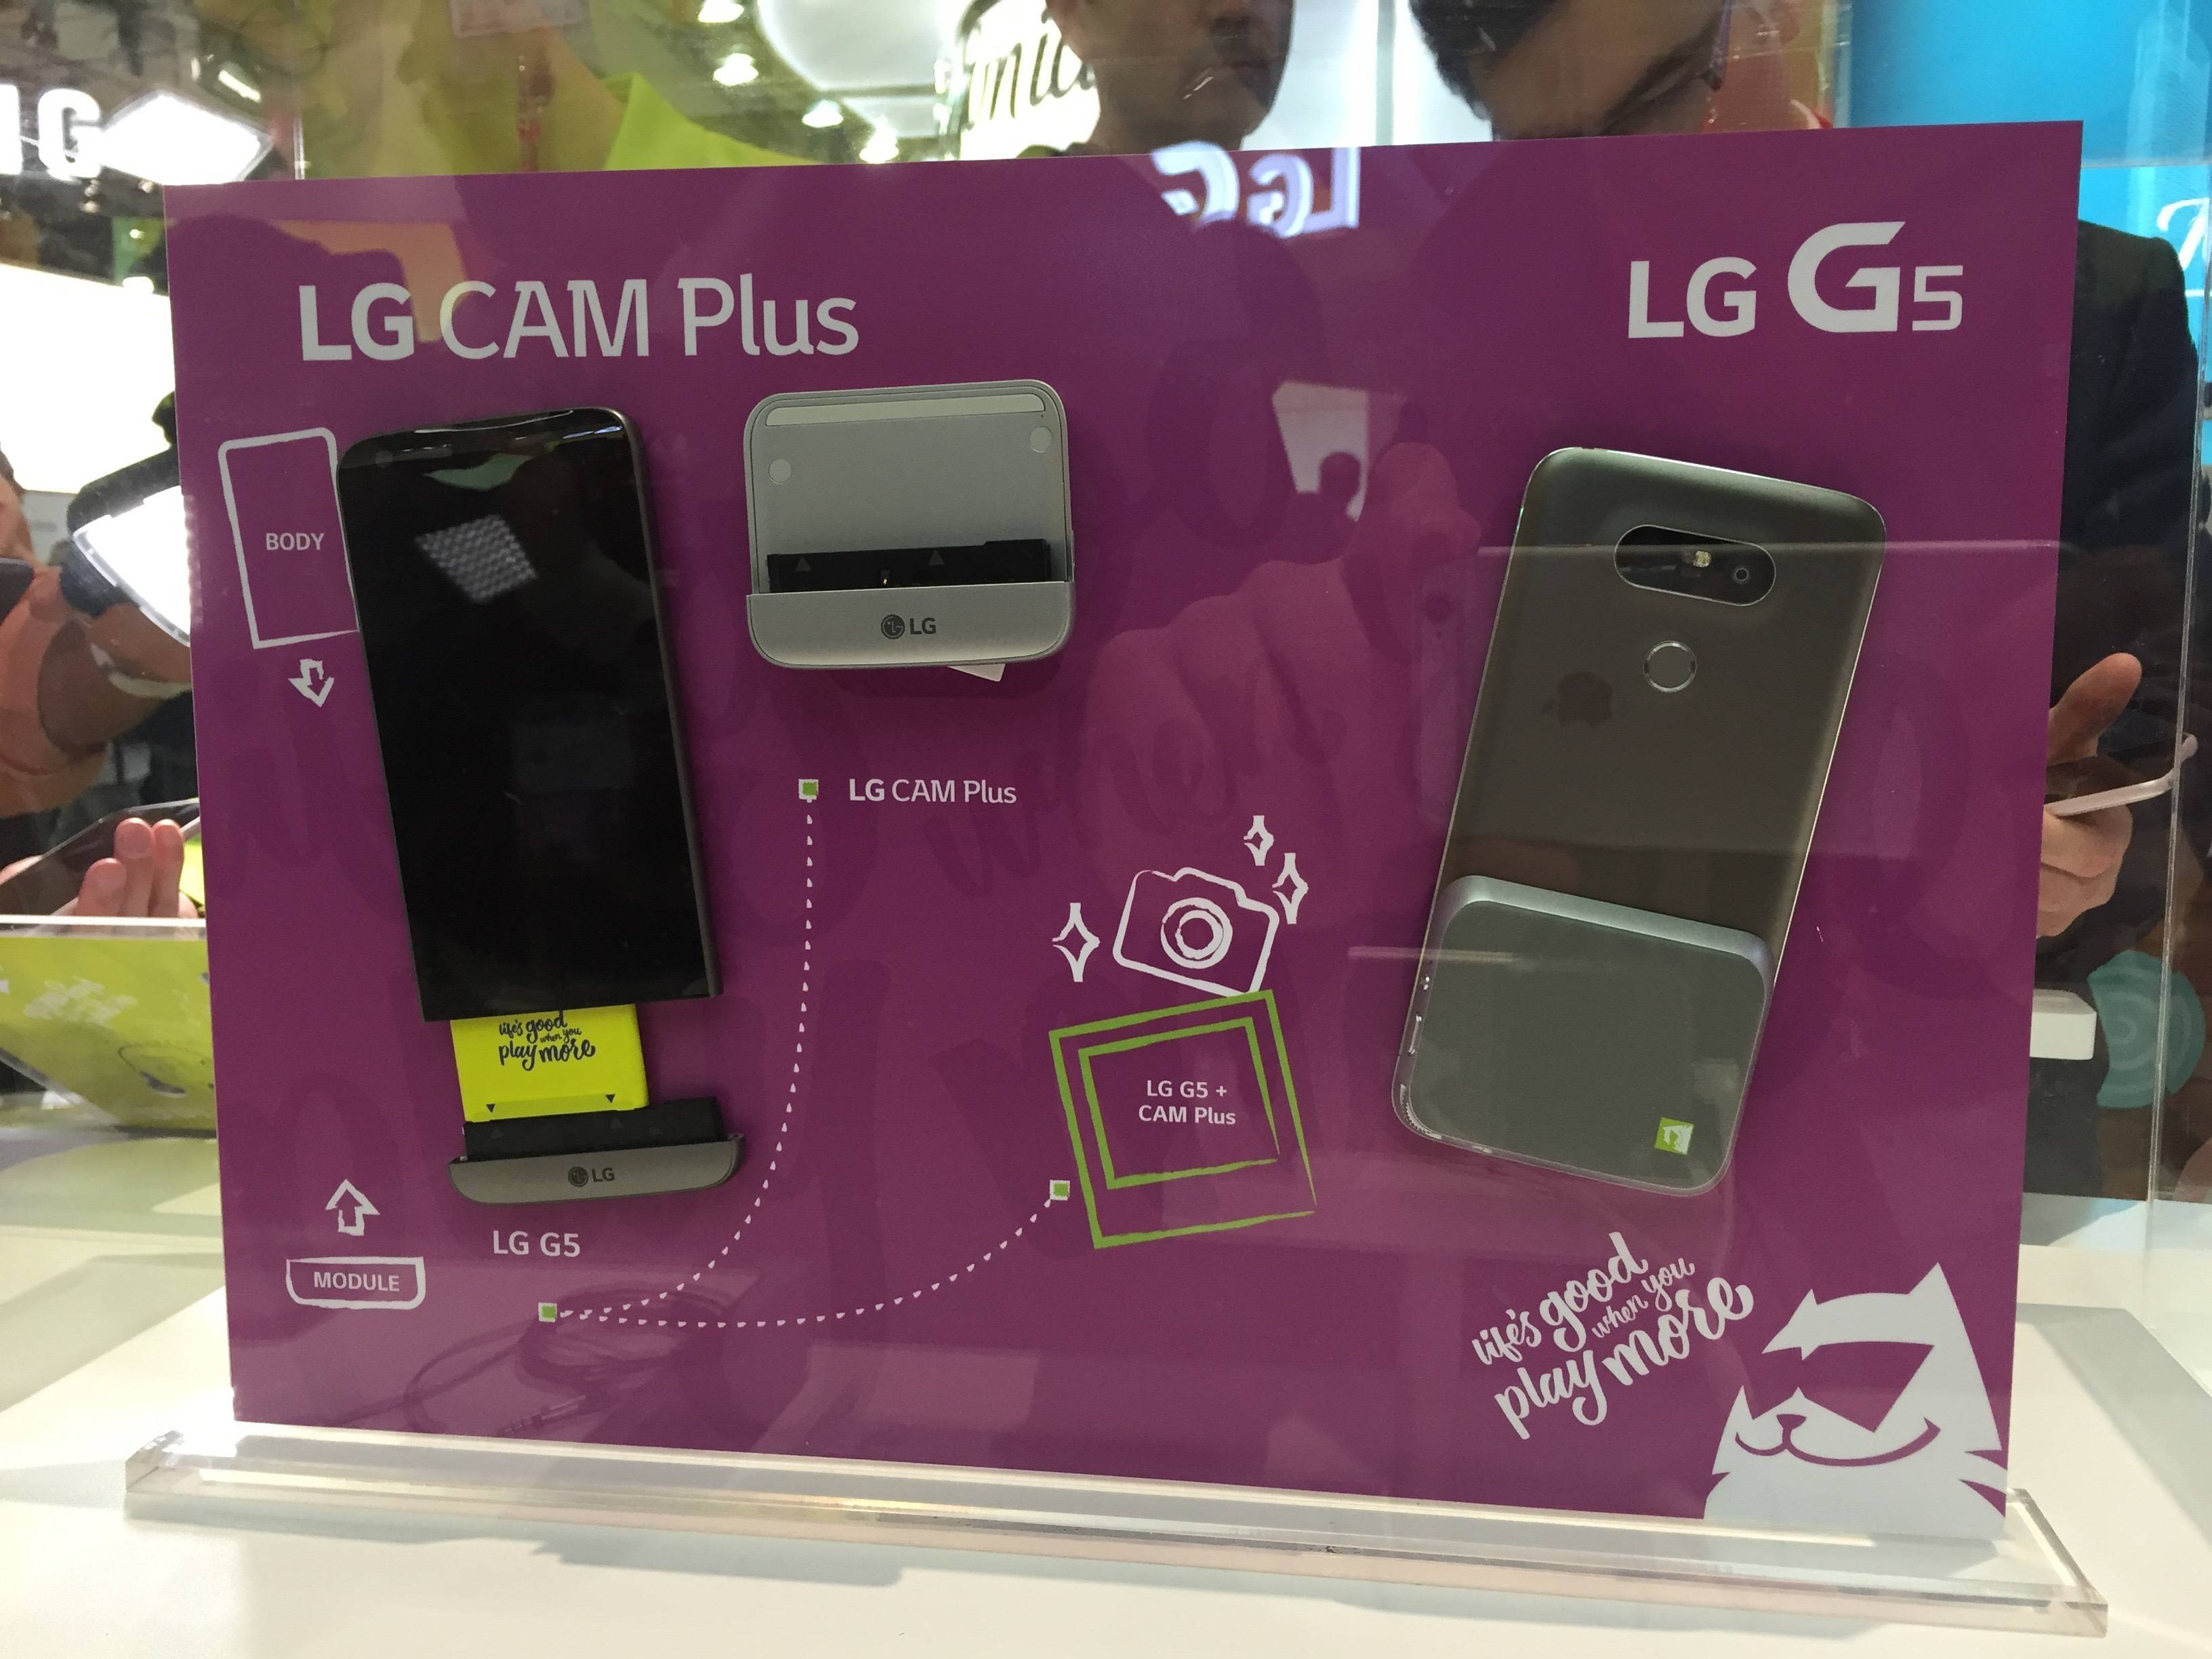 Mobile World Congress 2016 MWC